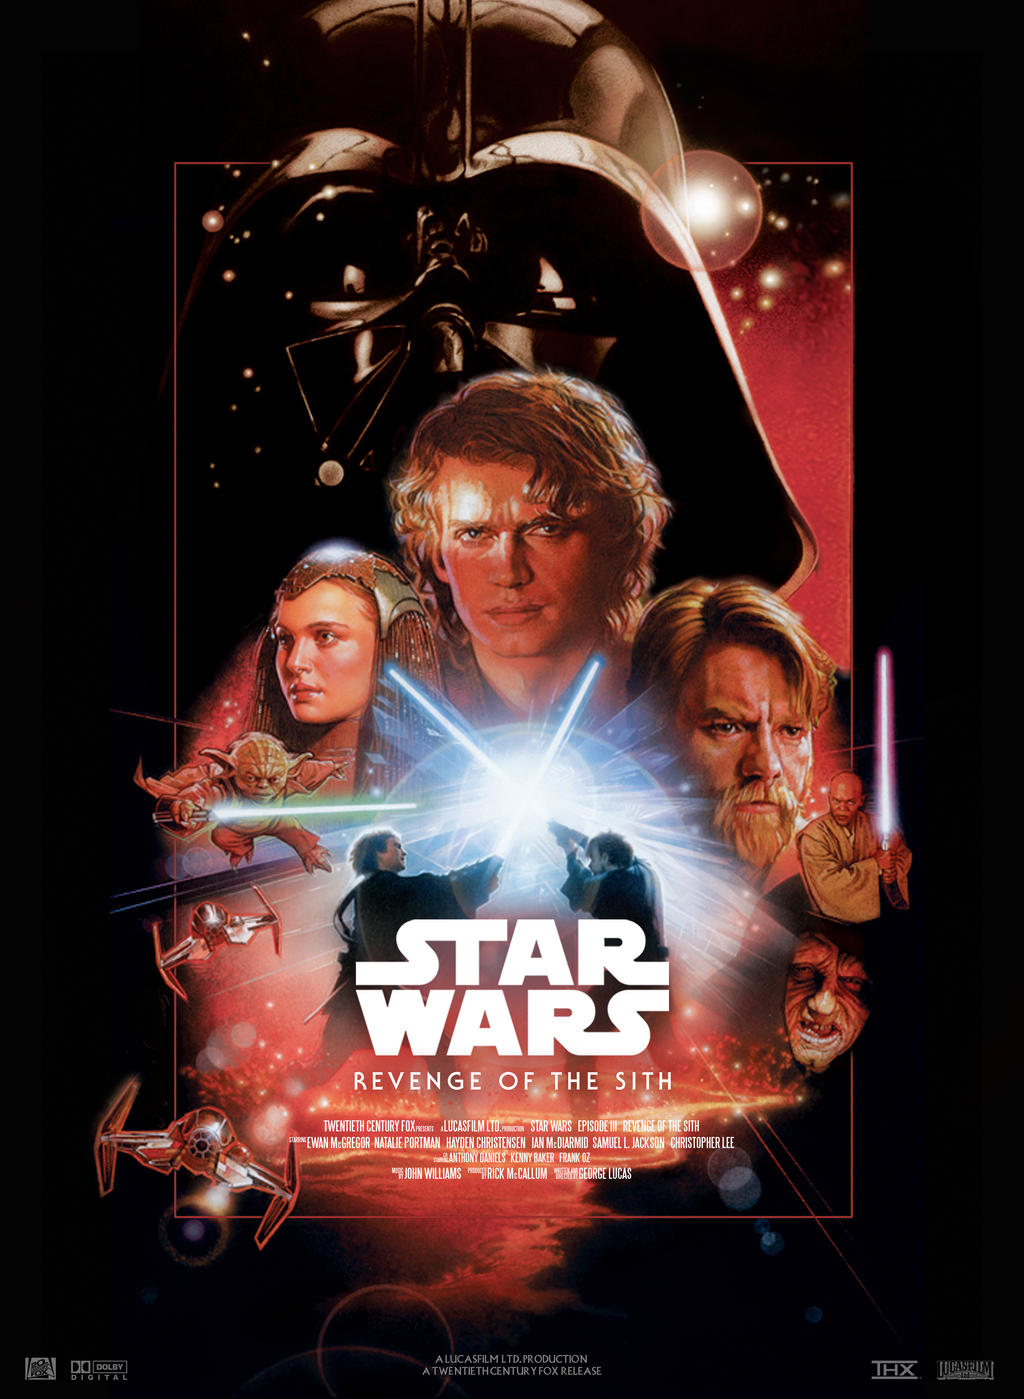 Star Wars III : Revenge Of The Sith - Movie Poster by nei1b on DeviantArt